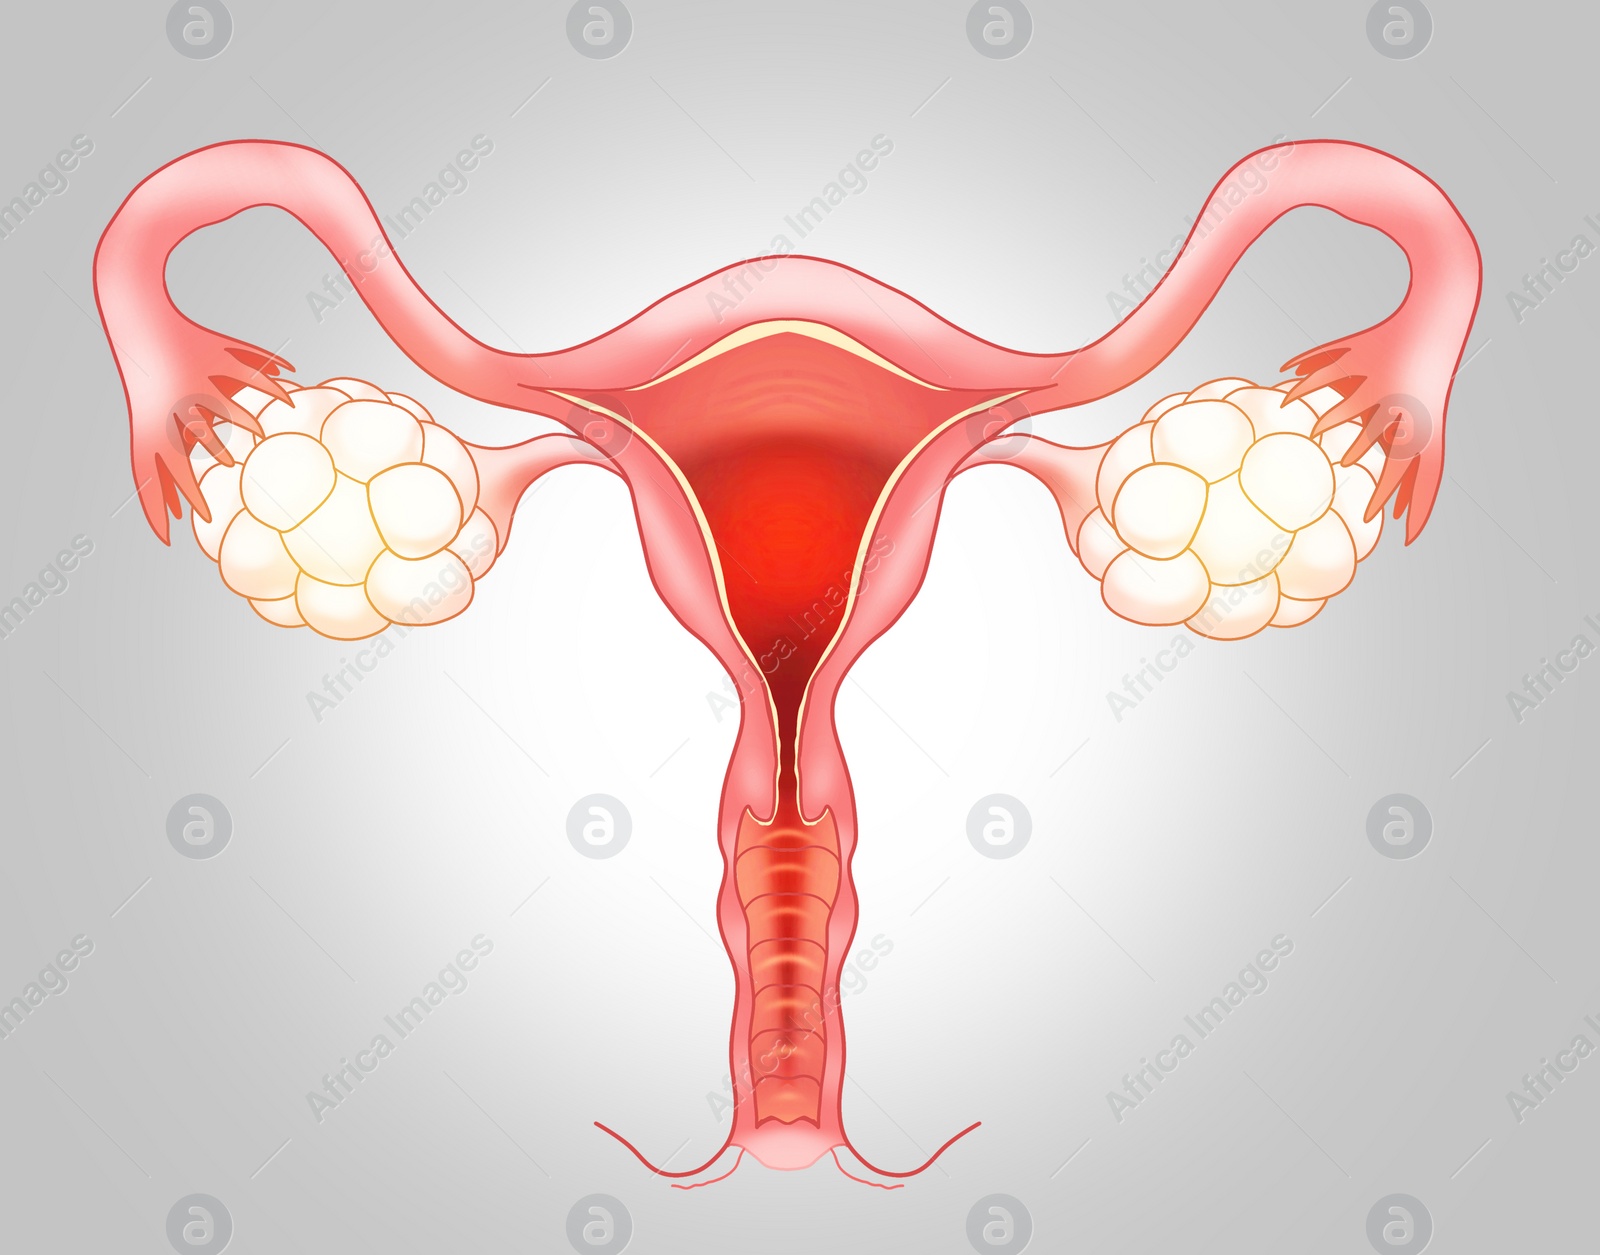 Image of Female reproductive system on light grey gradient background, illustration